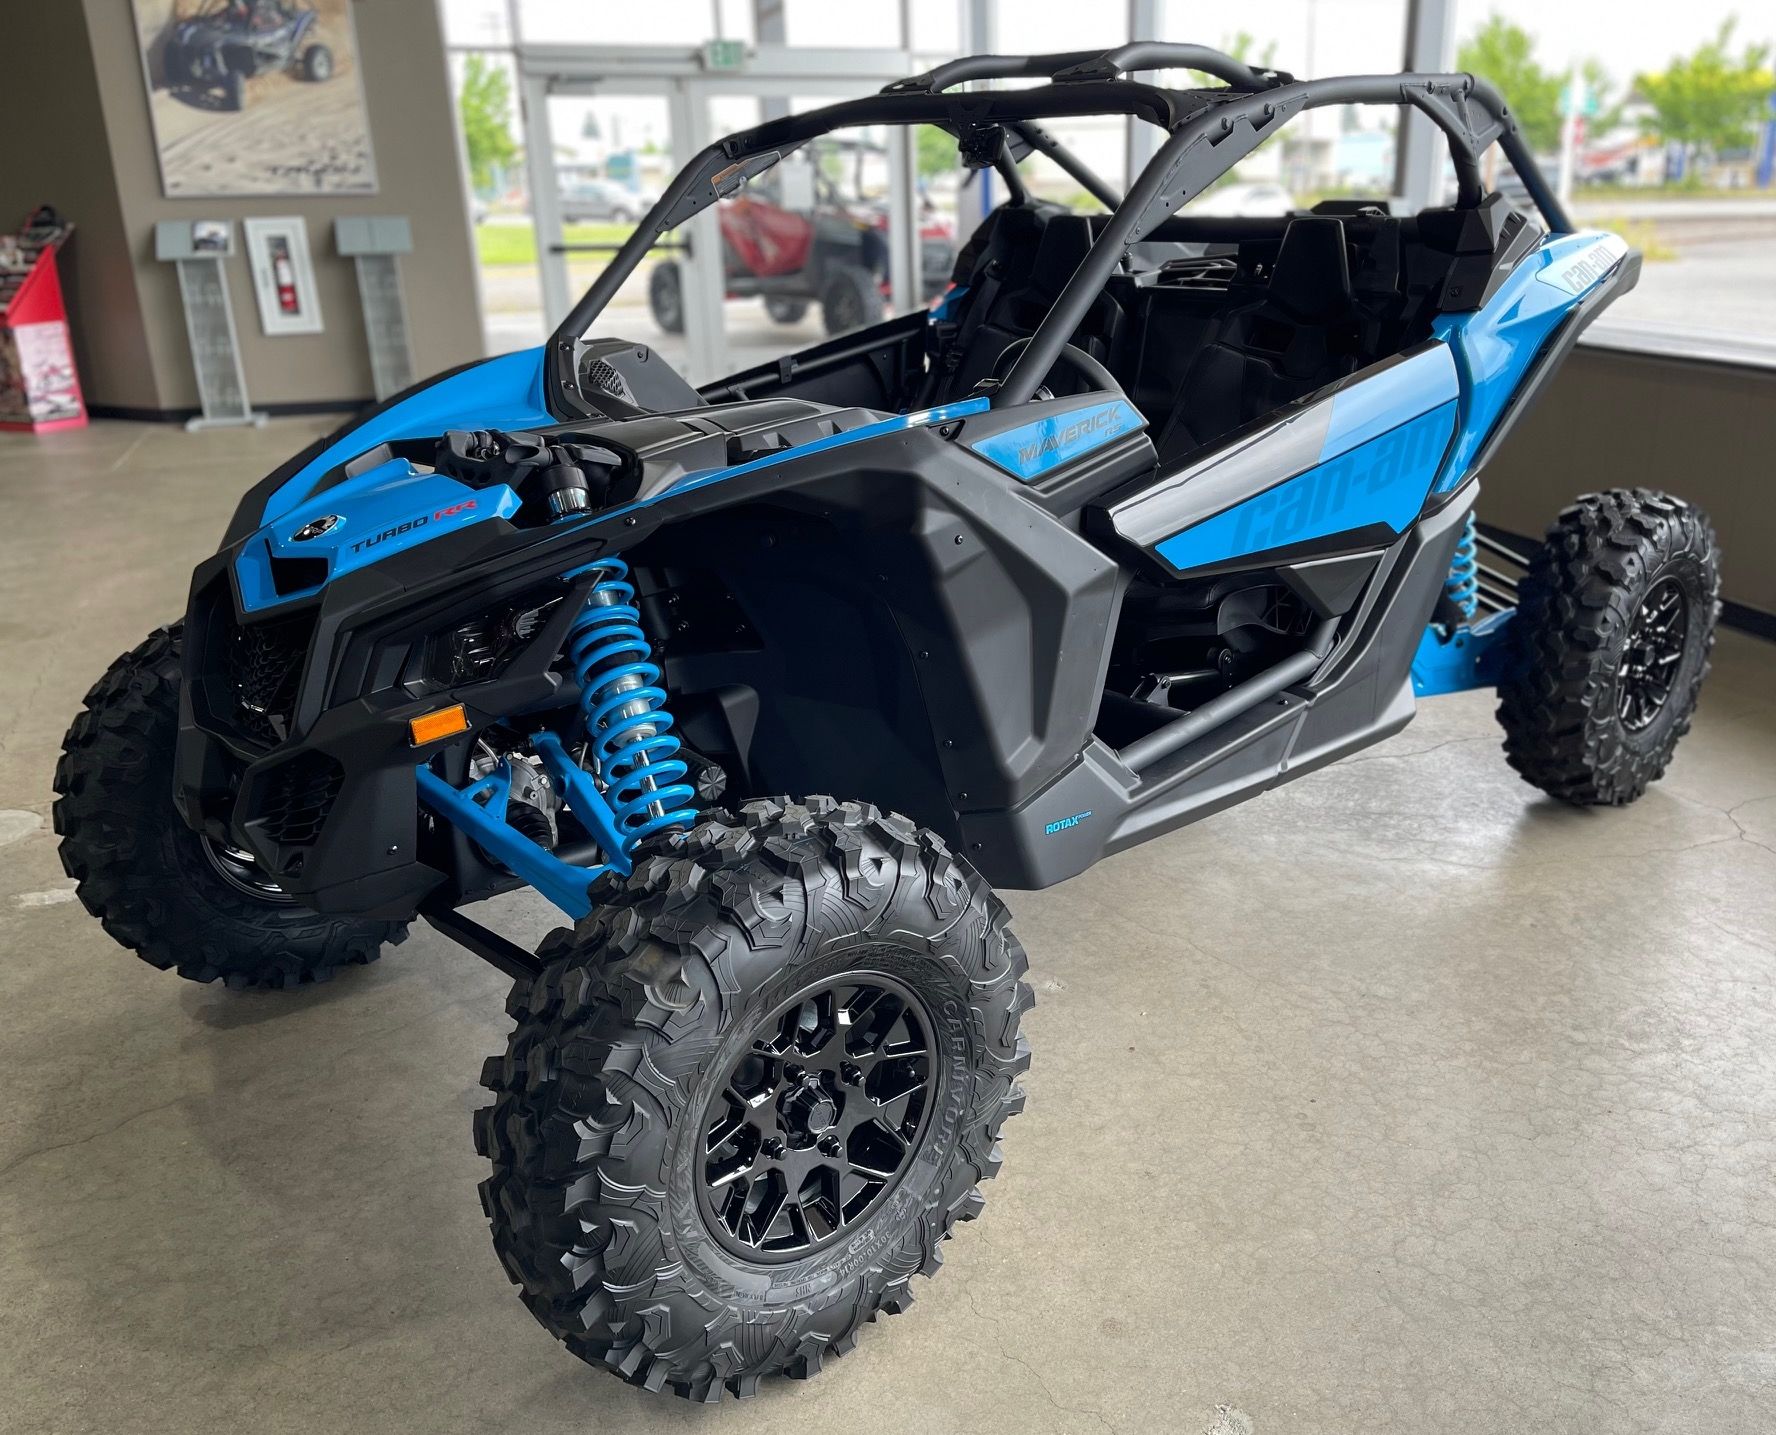 2022 Can-Am MAVERICK X3 RS Turbo RR in Albany, Oregon - Photo 1